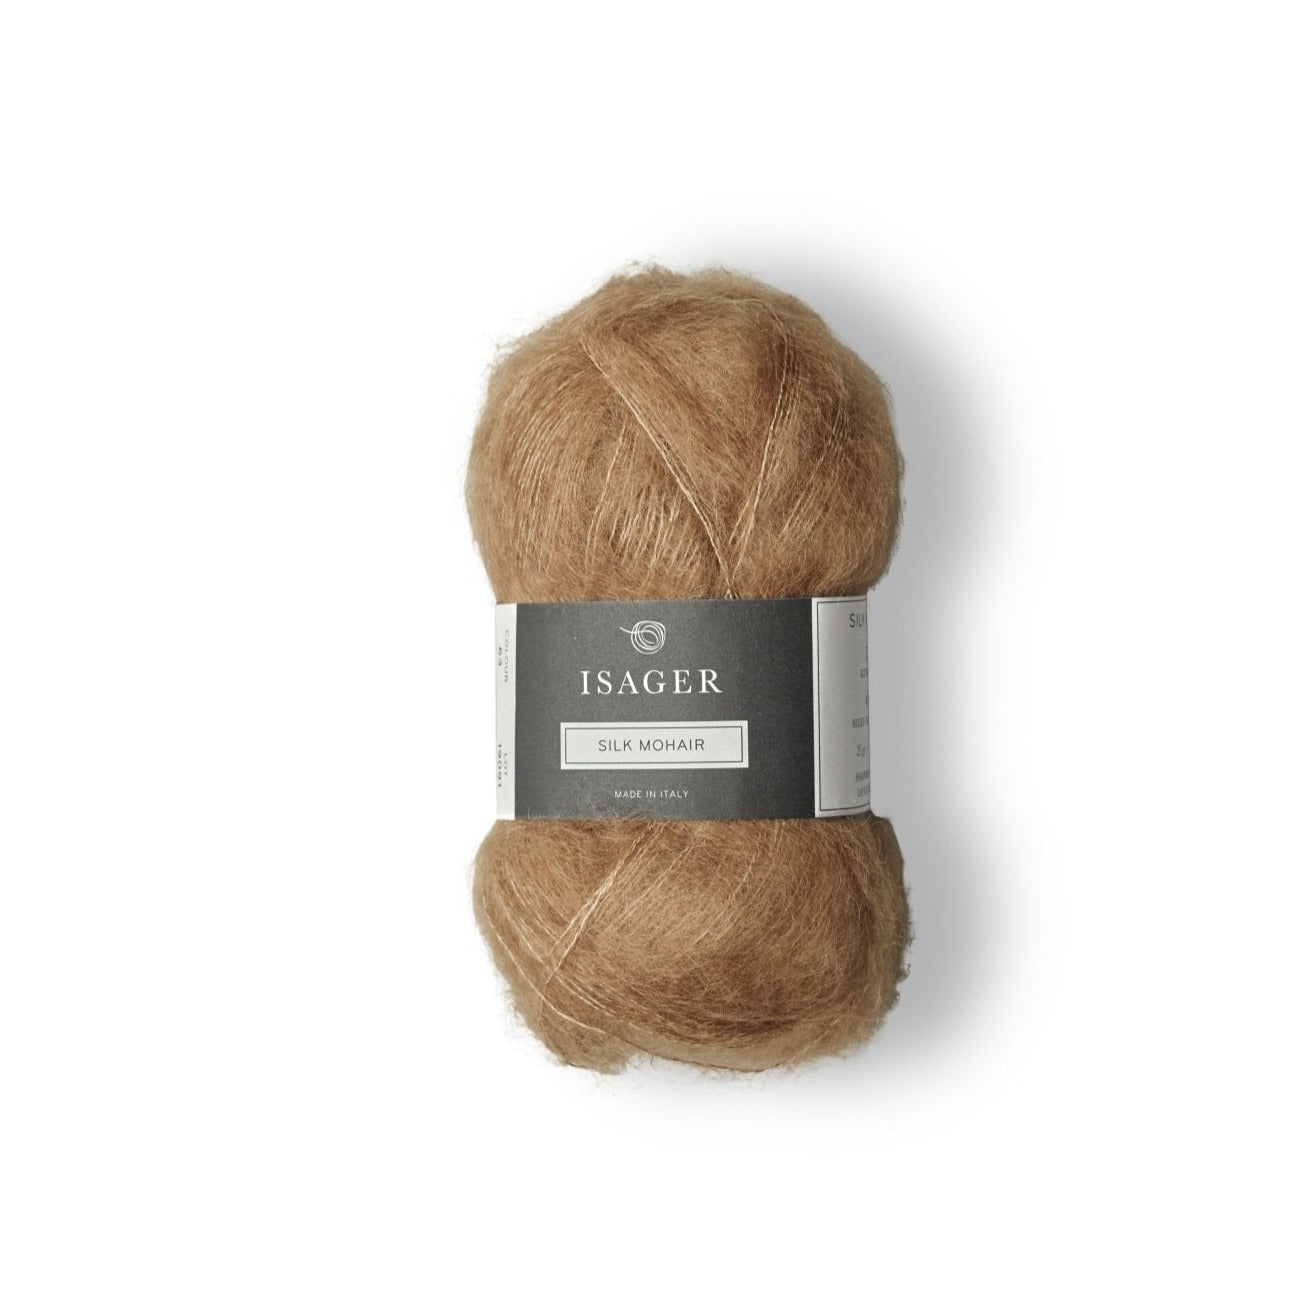 Isager Silk Mohair - 63 - 2 Ply - Isager - The Little Yarn Store